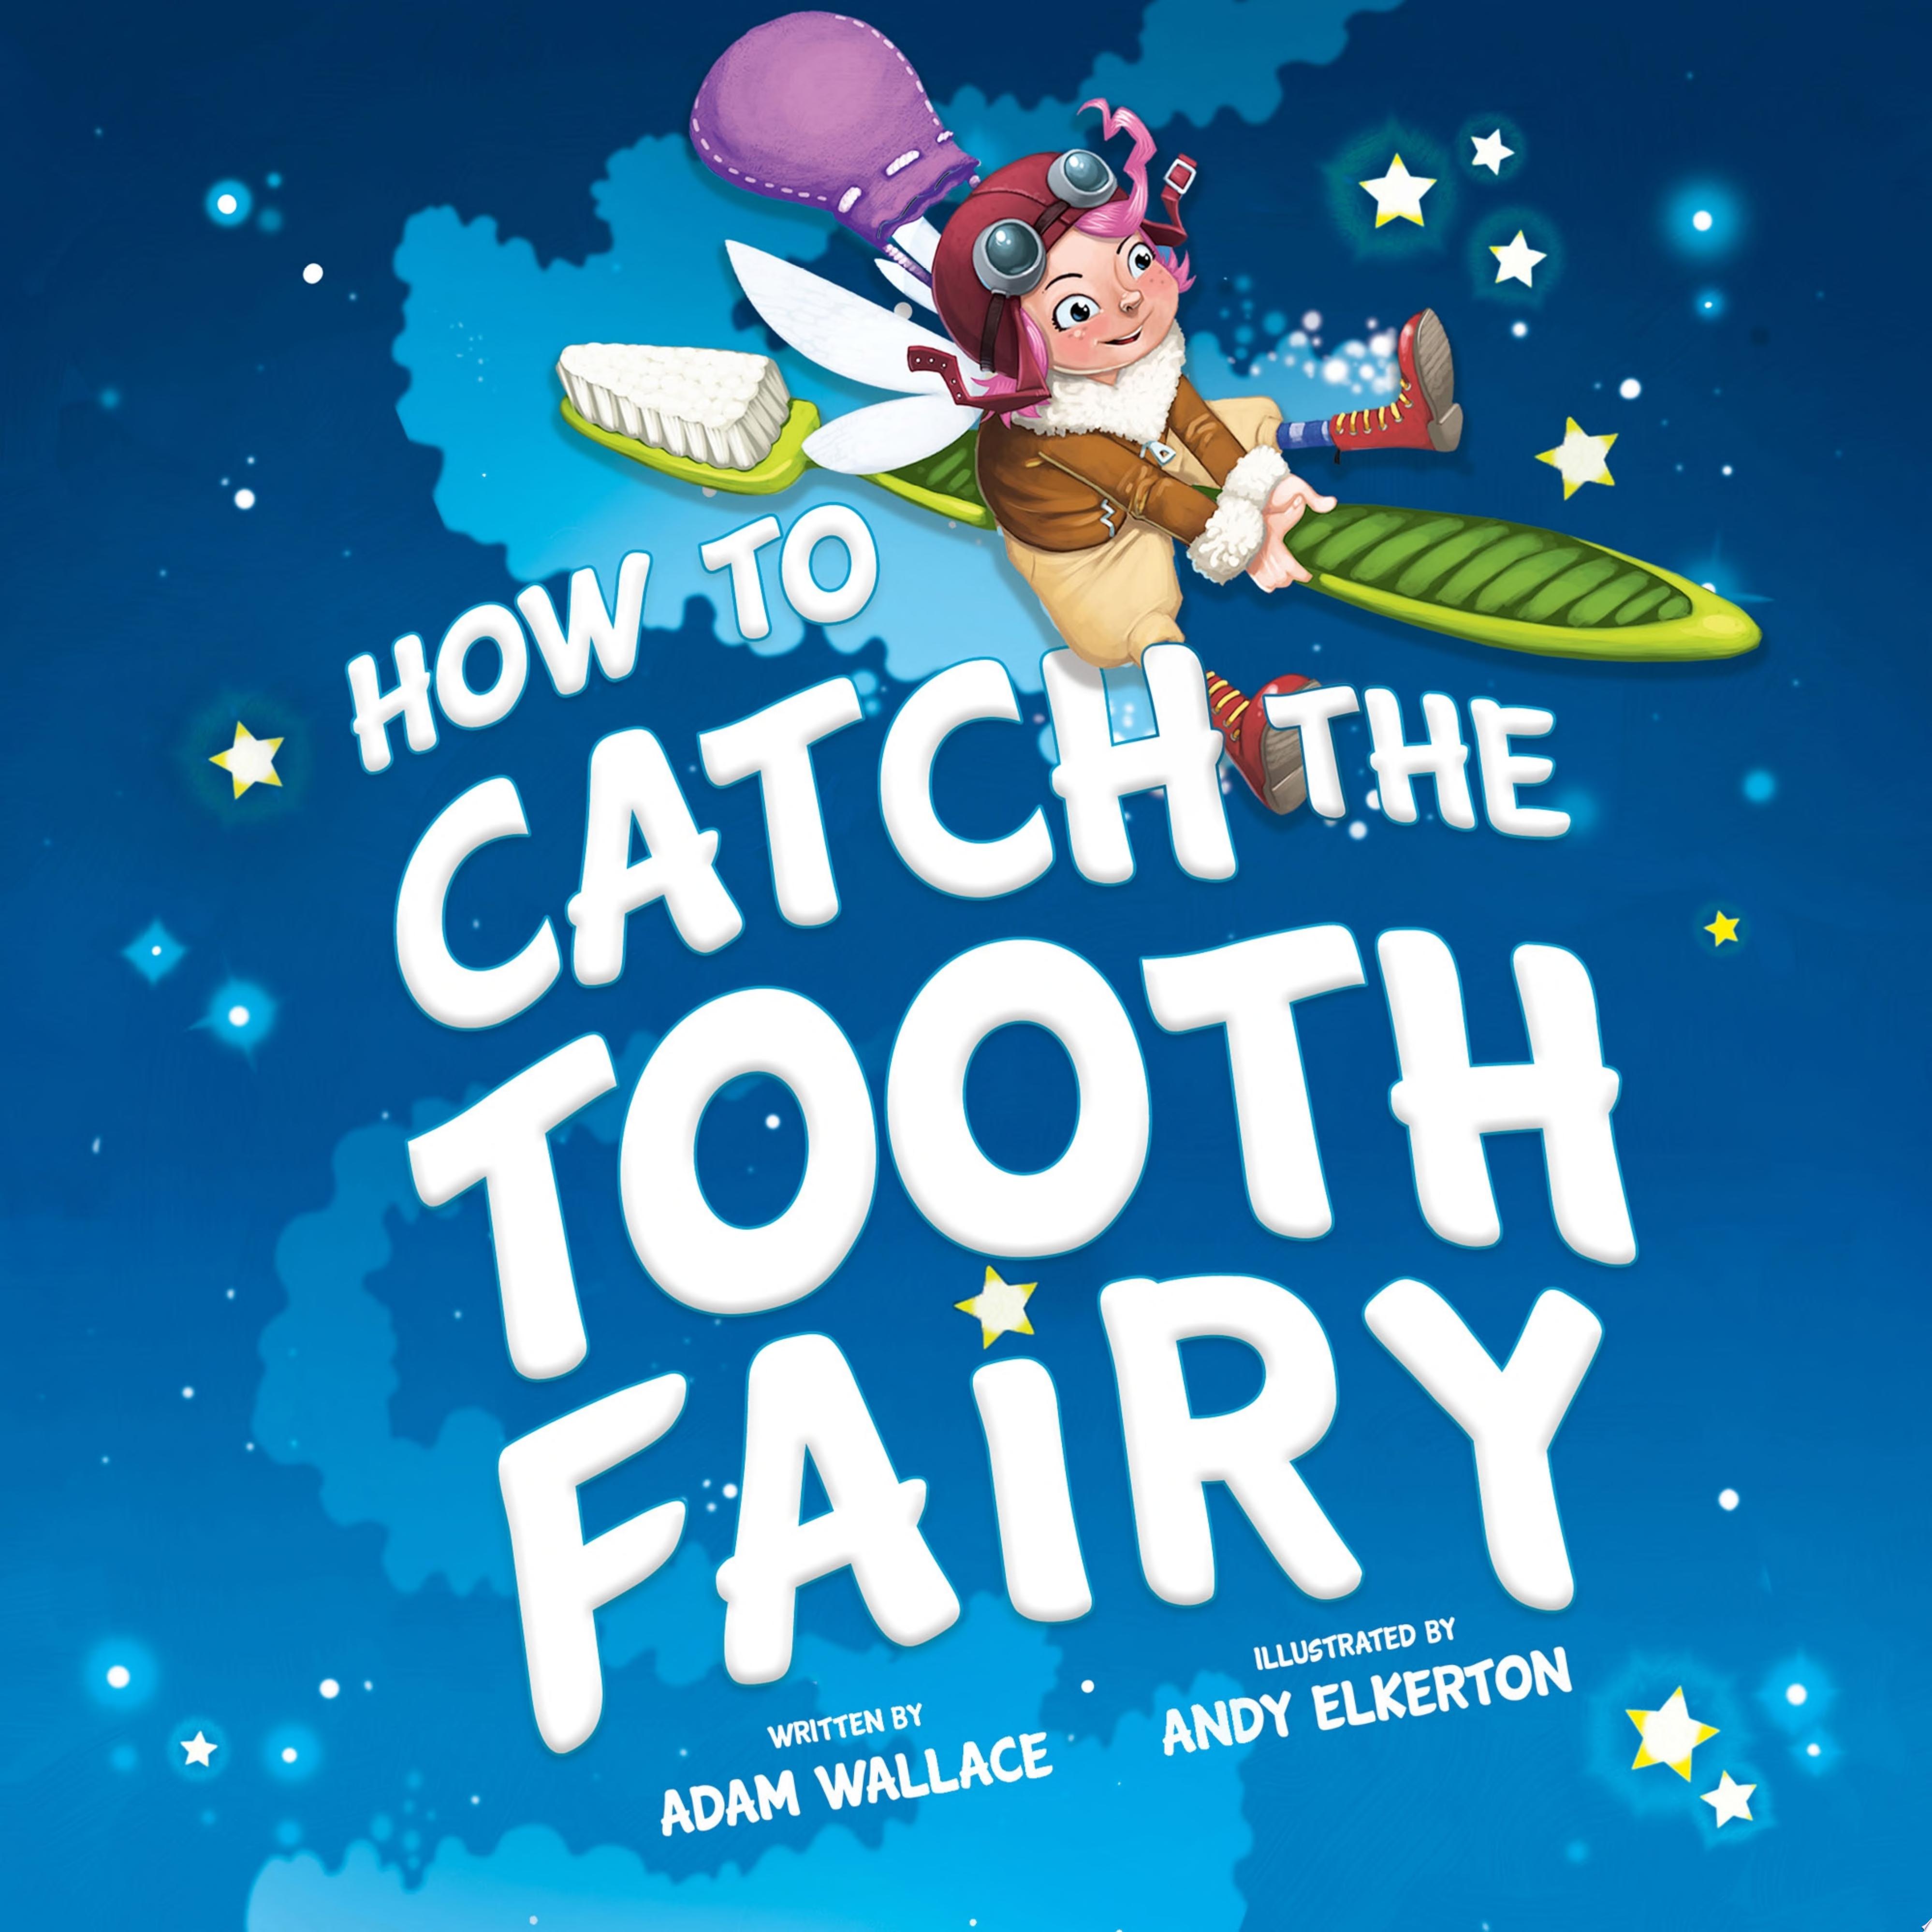 Image for "How to Catch the Tooth Fairy"